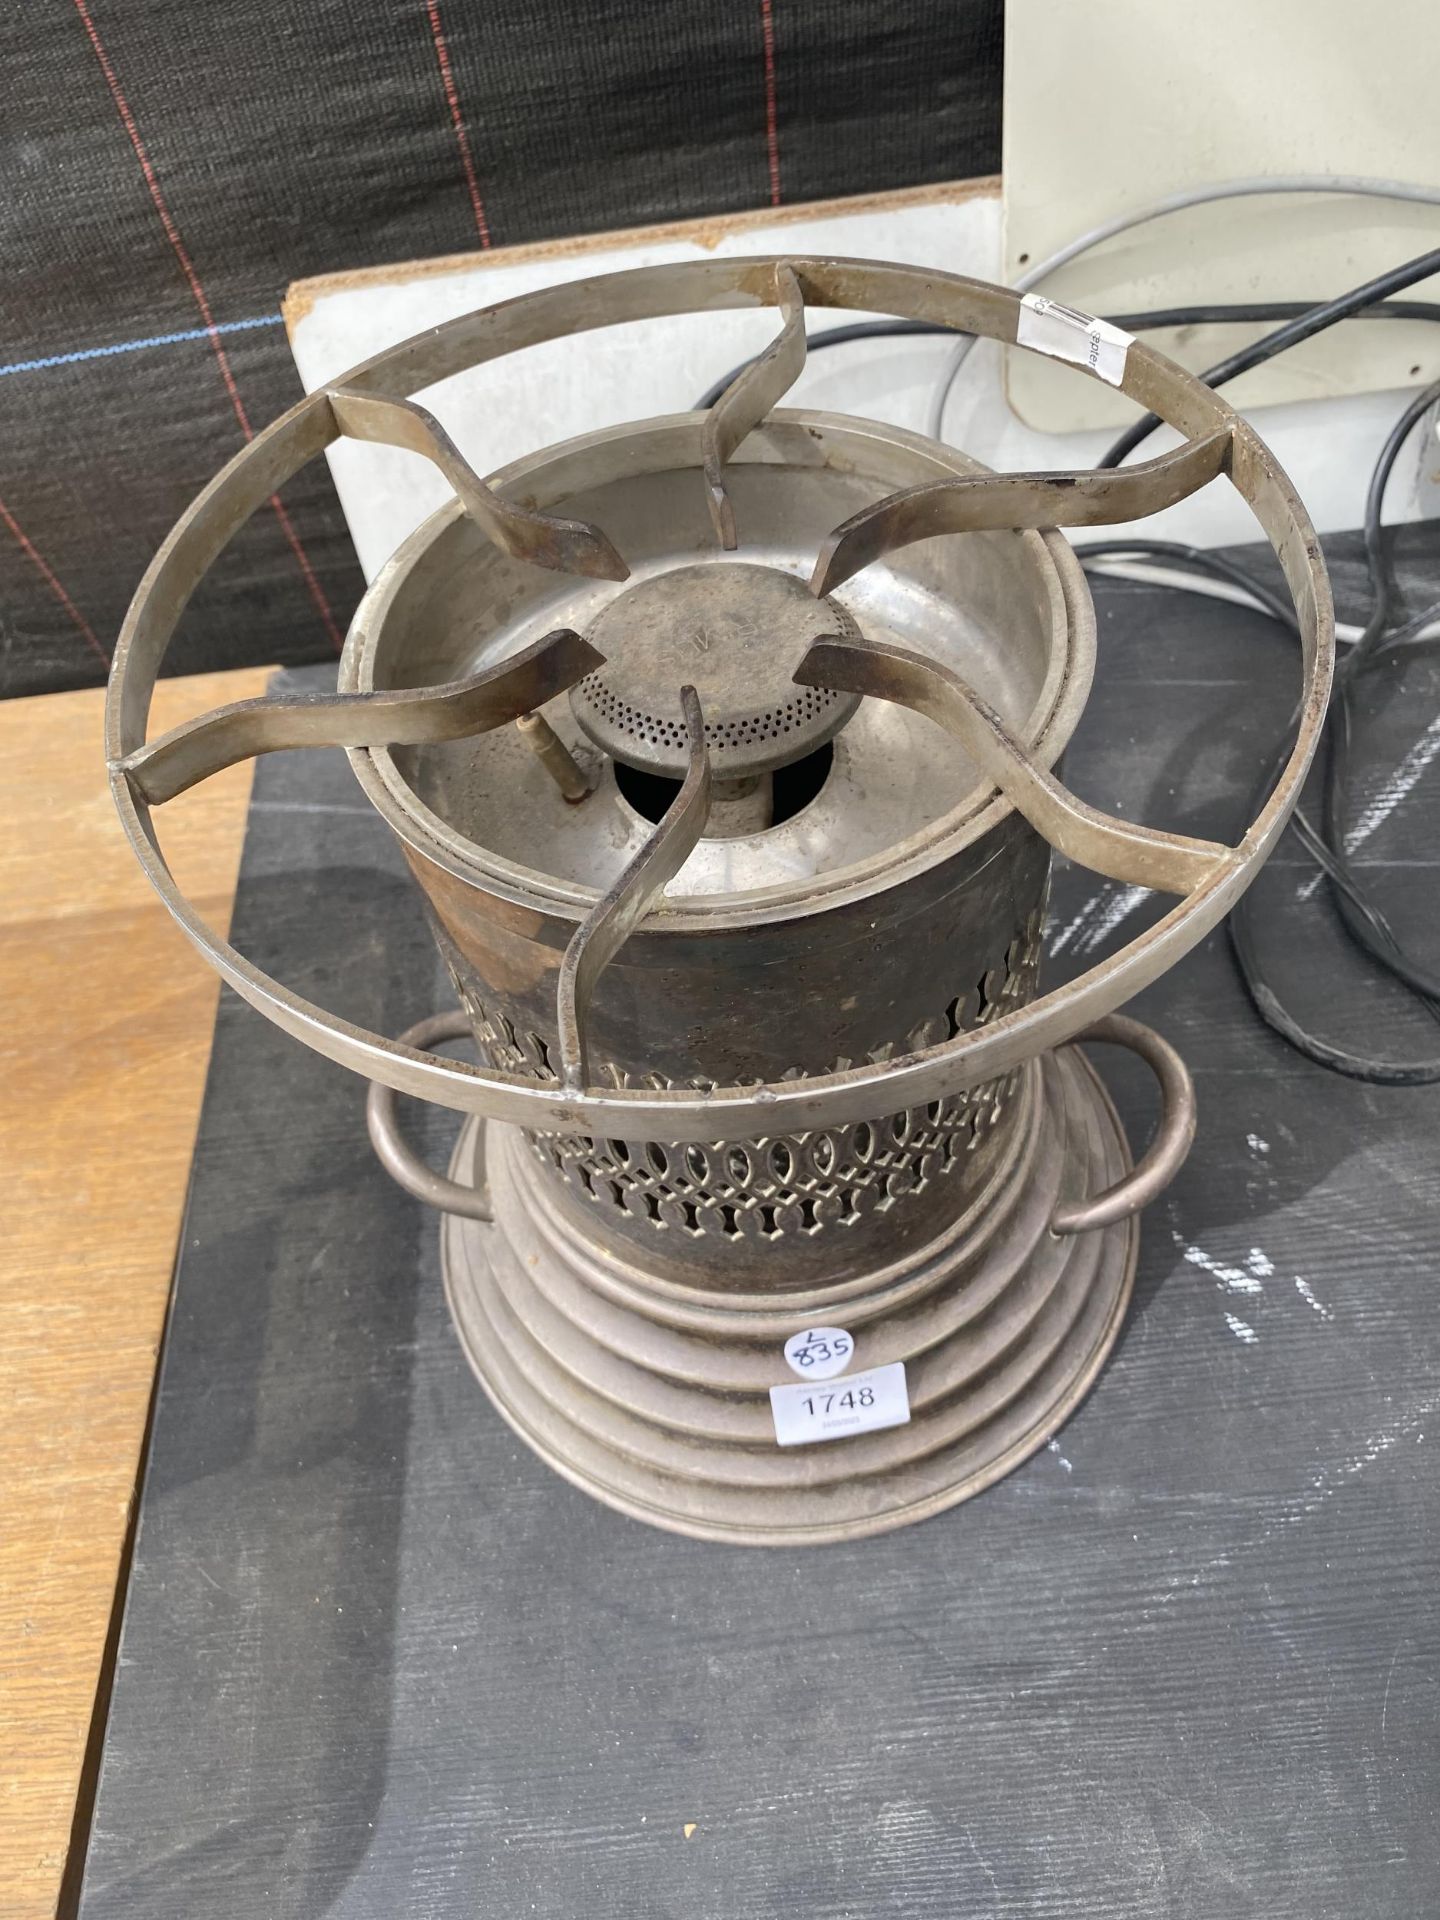 A VINTAGE SILVER PLATED PORTABLE CAMPING STOVE - Image 2 of 3